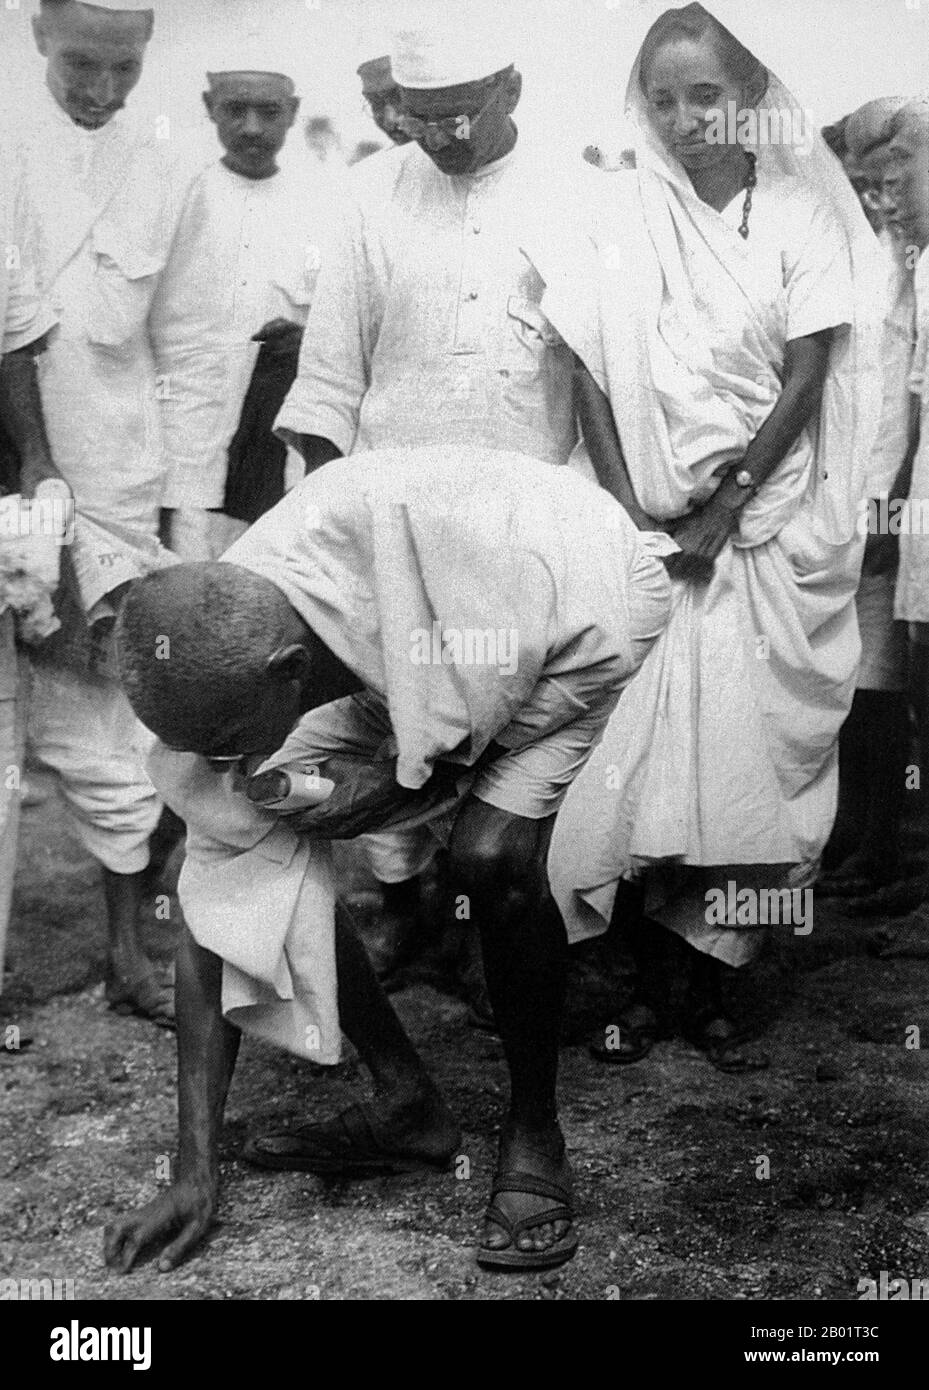 India: Mahatma Gandhi (2 October 1869 - 30 January 1948), preeminent political and ideological leader of India's independence movement, ending the Salt March at Dandi, 5 April 1930.  Mohandas Karamchand Gandhi was the preeminent political and ideological leader of India during the Indian independence movement. He pioneered satyagraha. This is defined as resistance to tyranny through mass civil disobedience, a philosophy firmly founded upon ahimsa, or total non-violence. This concept helped India gain independence and inspired movements for civil rights and freedom across the world. Stock Photo